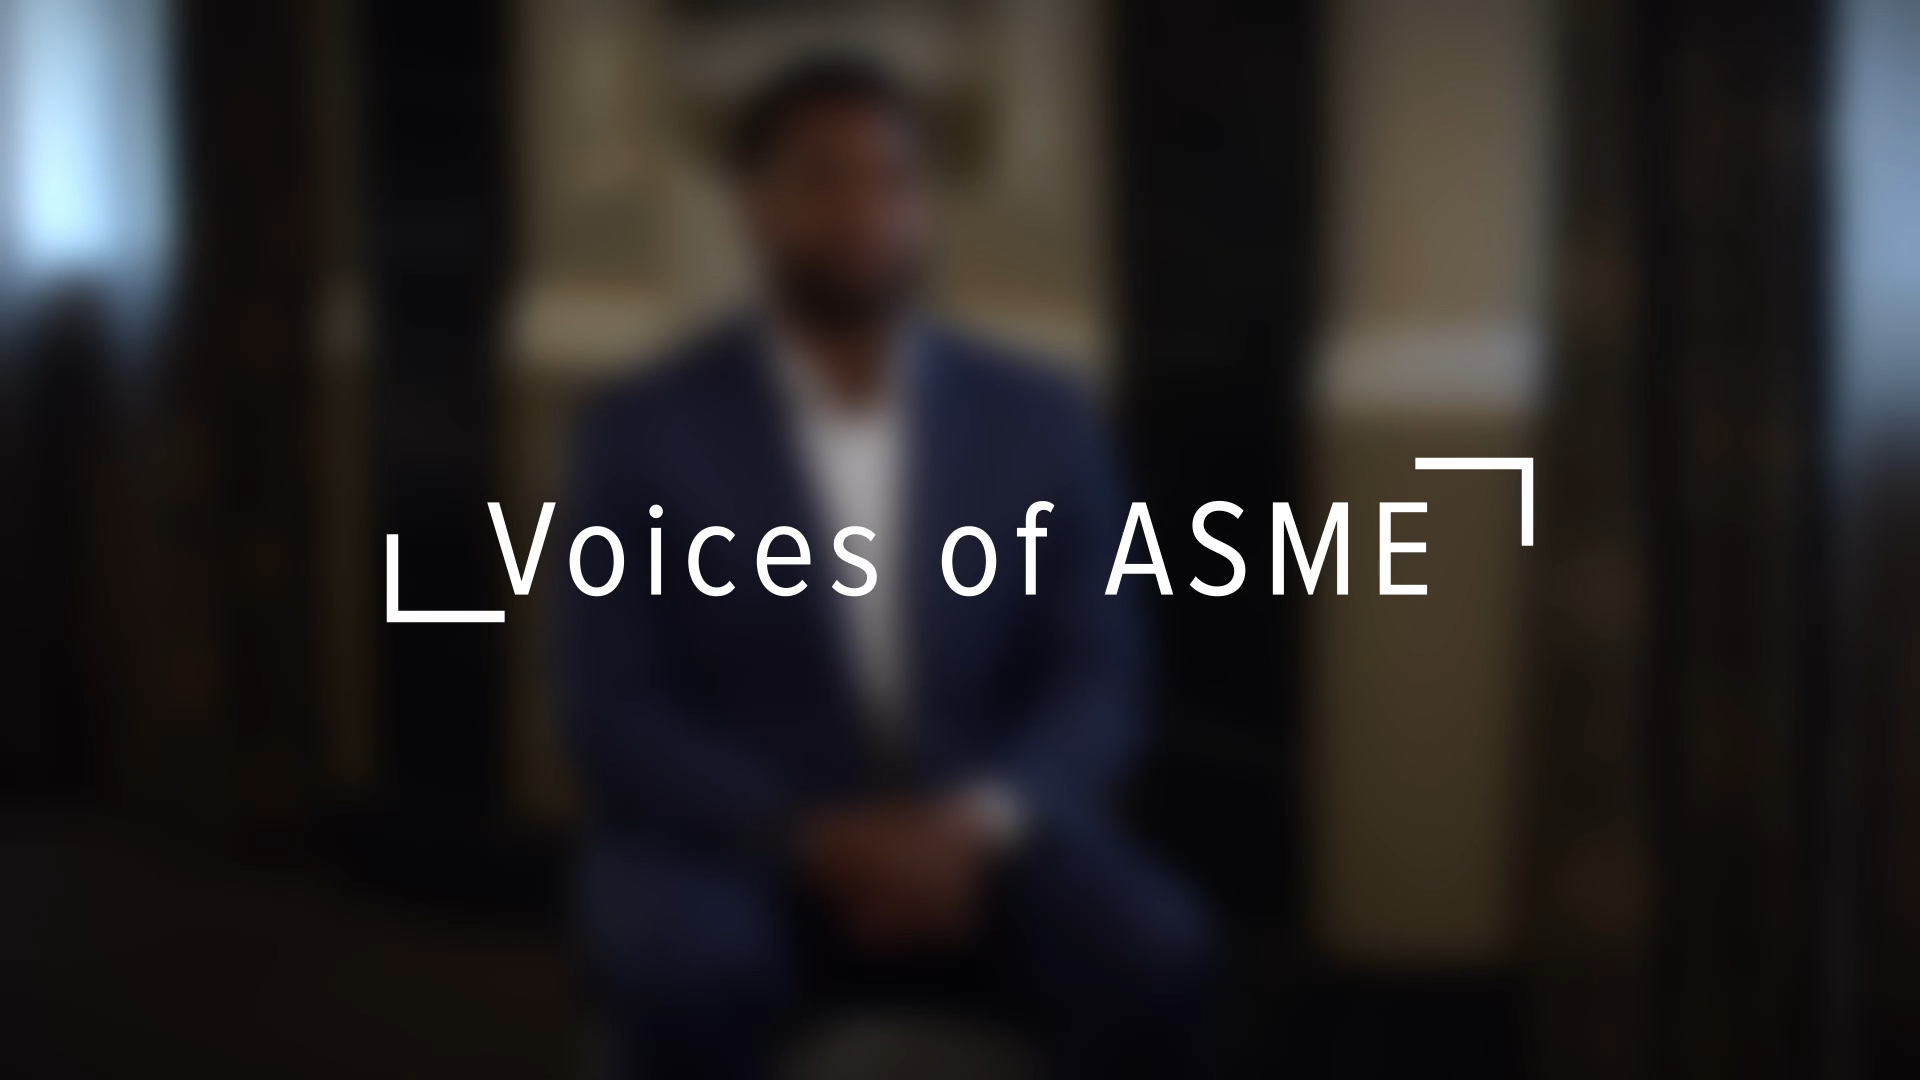 Voices of ASME with Khalid Umar